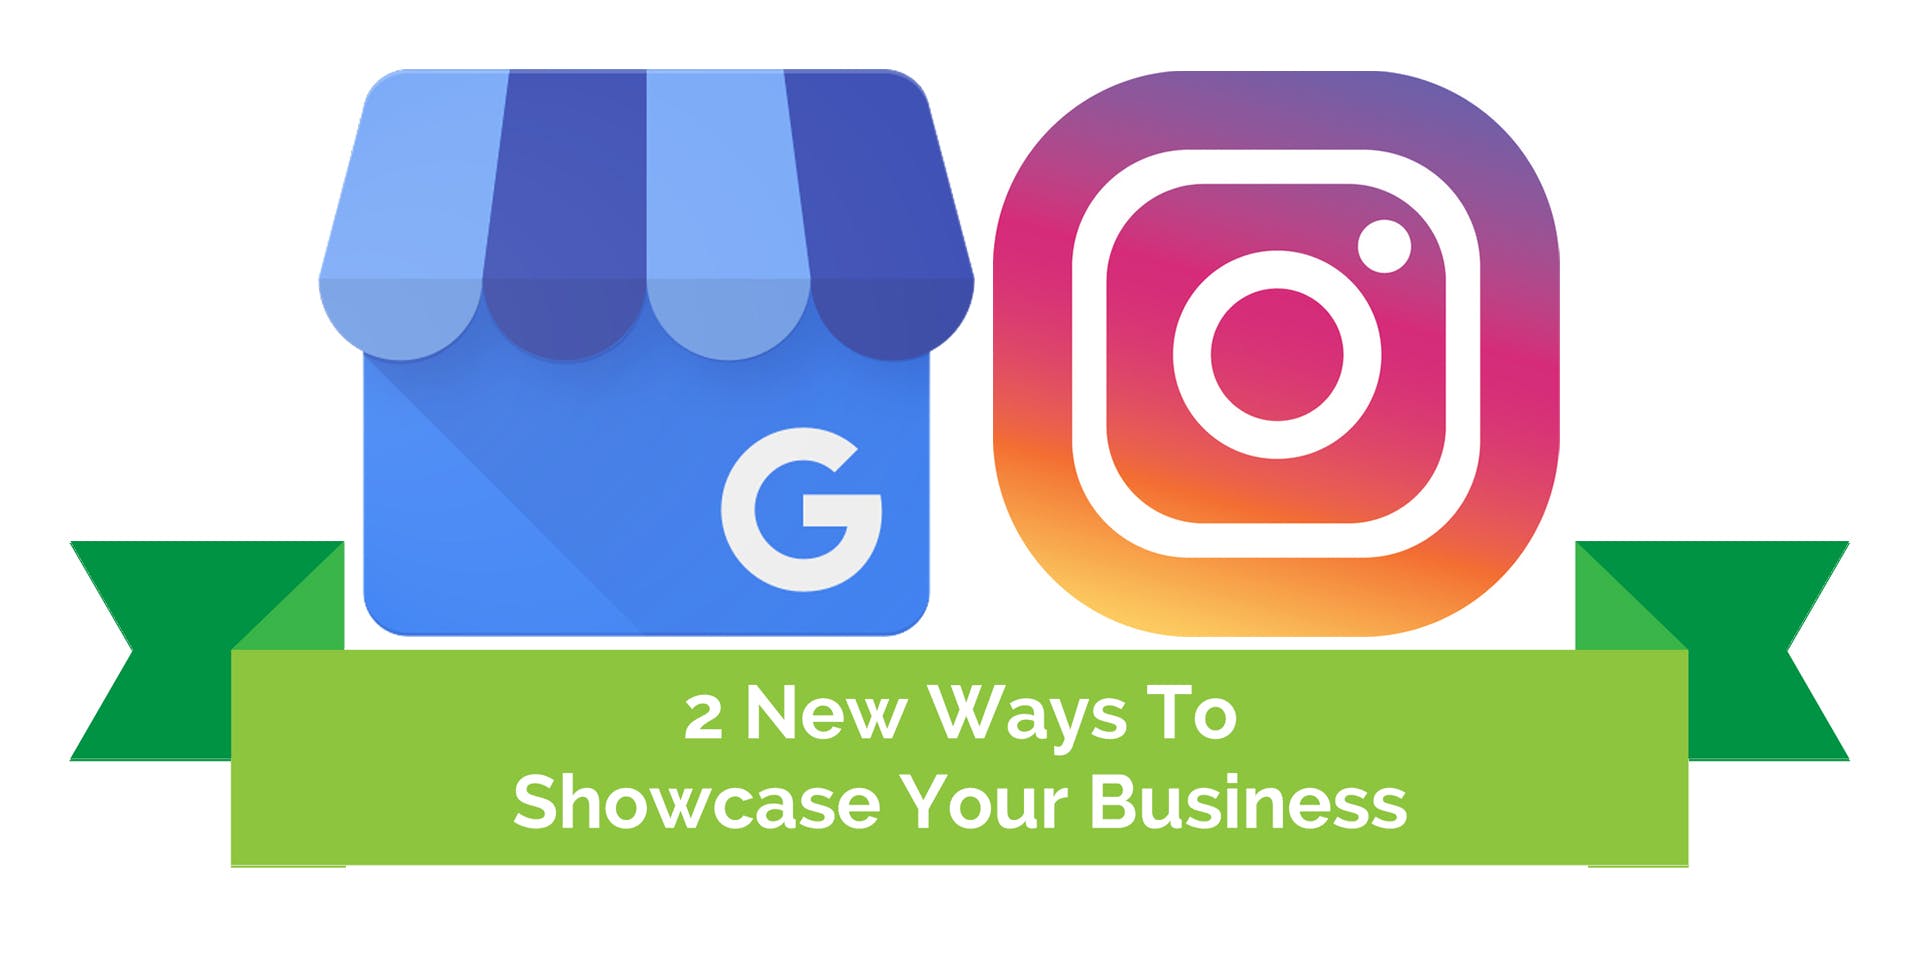 2 New Ways To Showcase Your Business